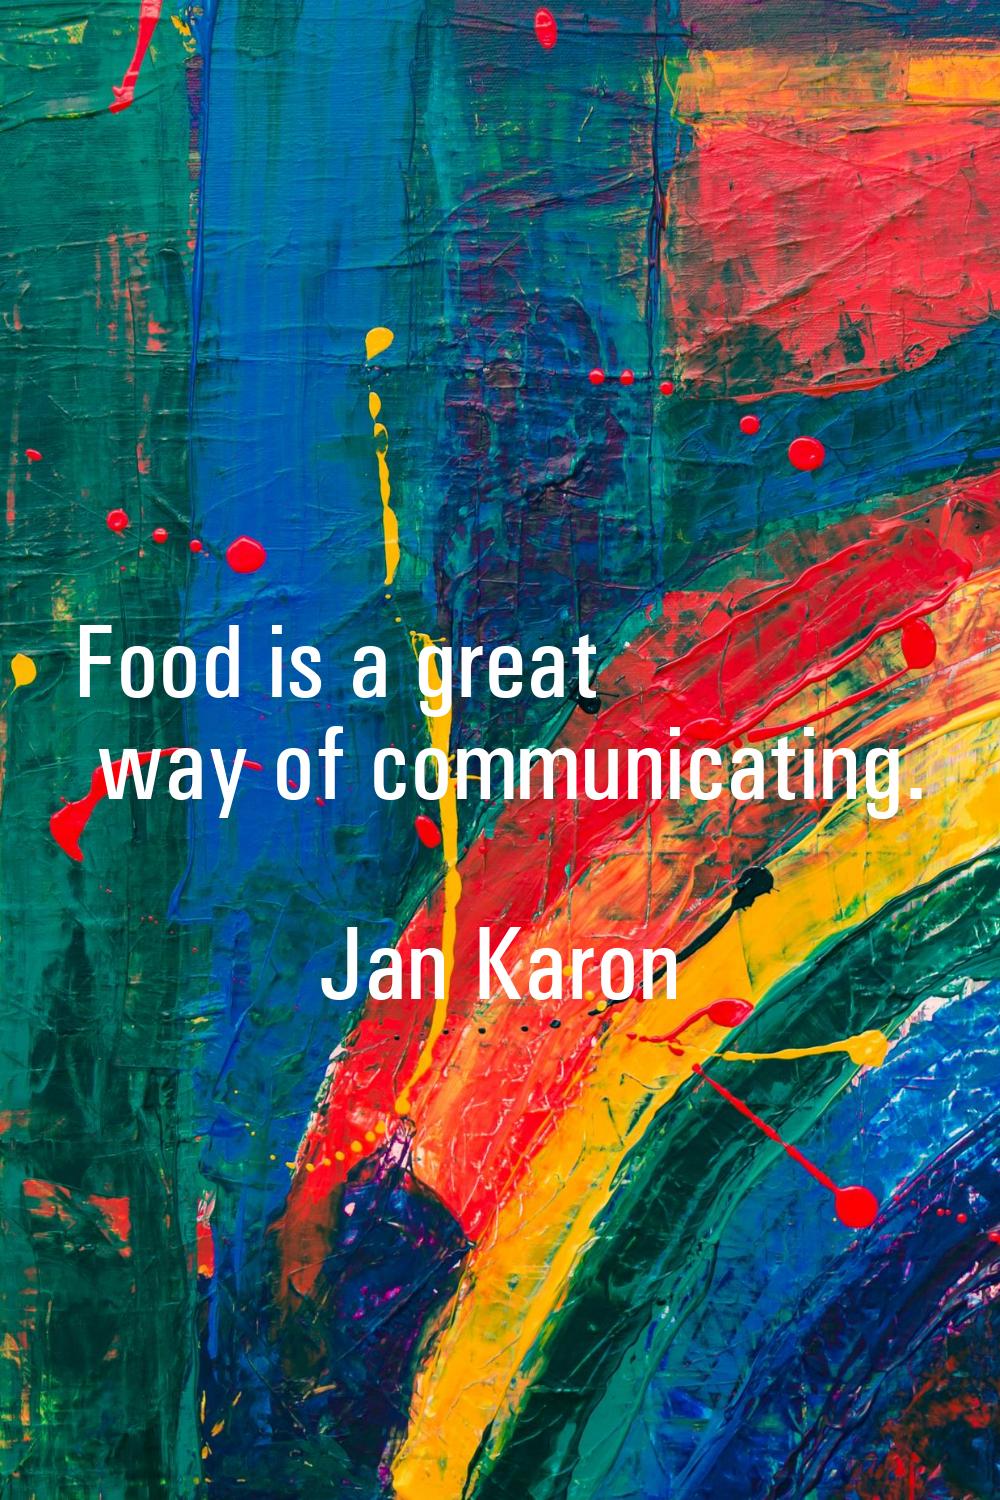 Food is a great way of communicating.